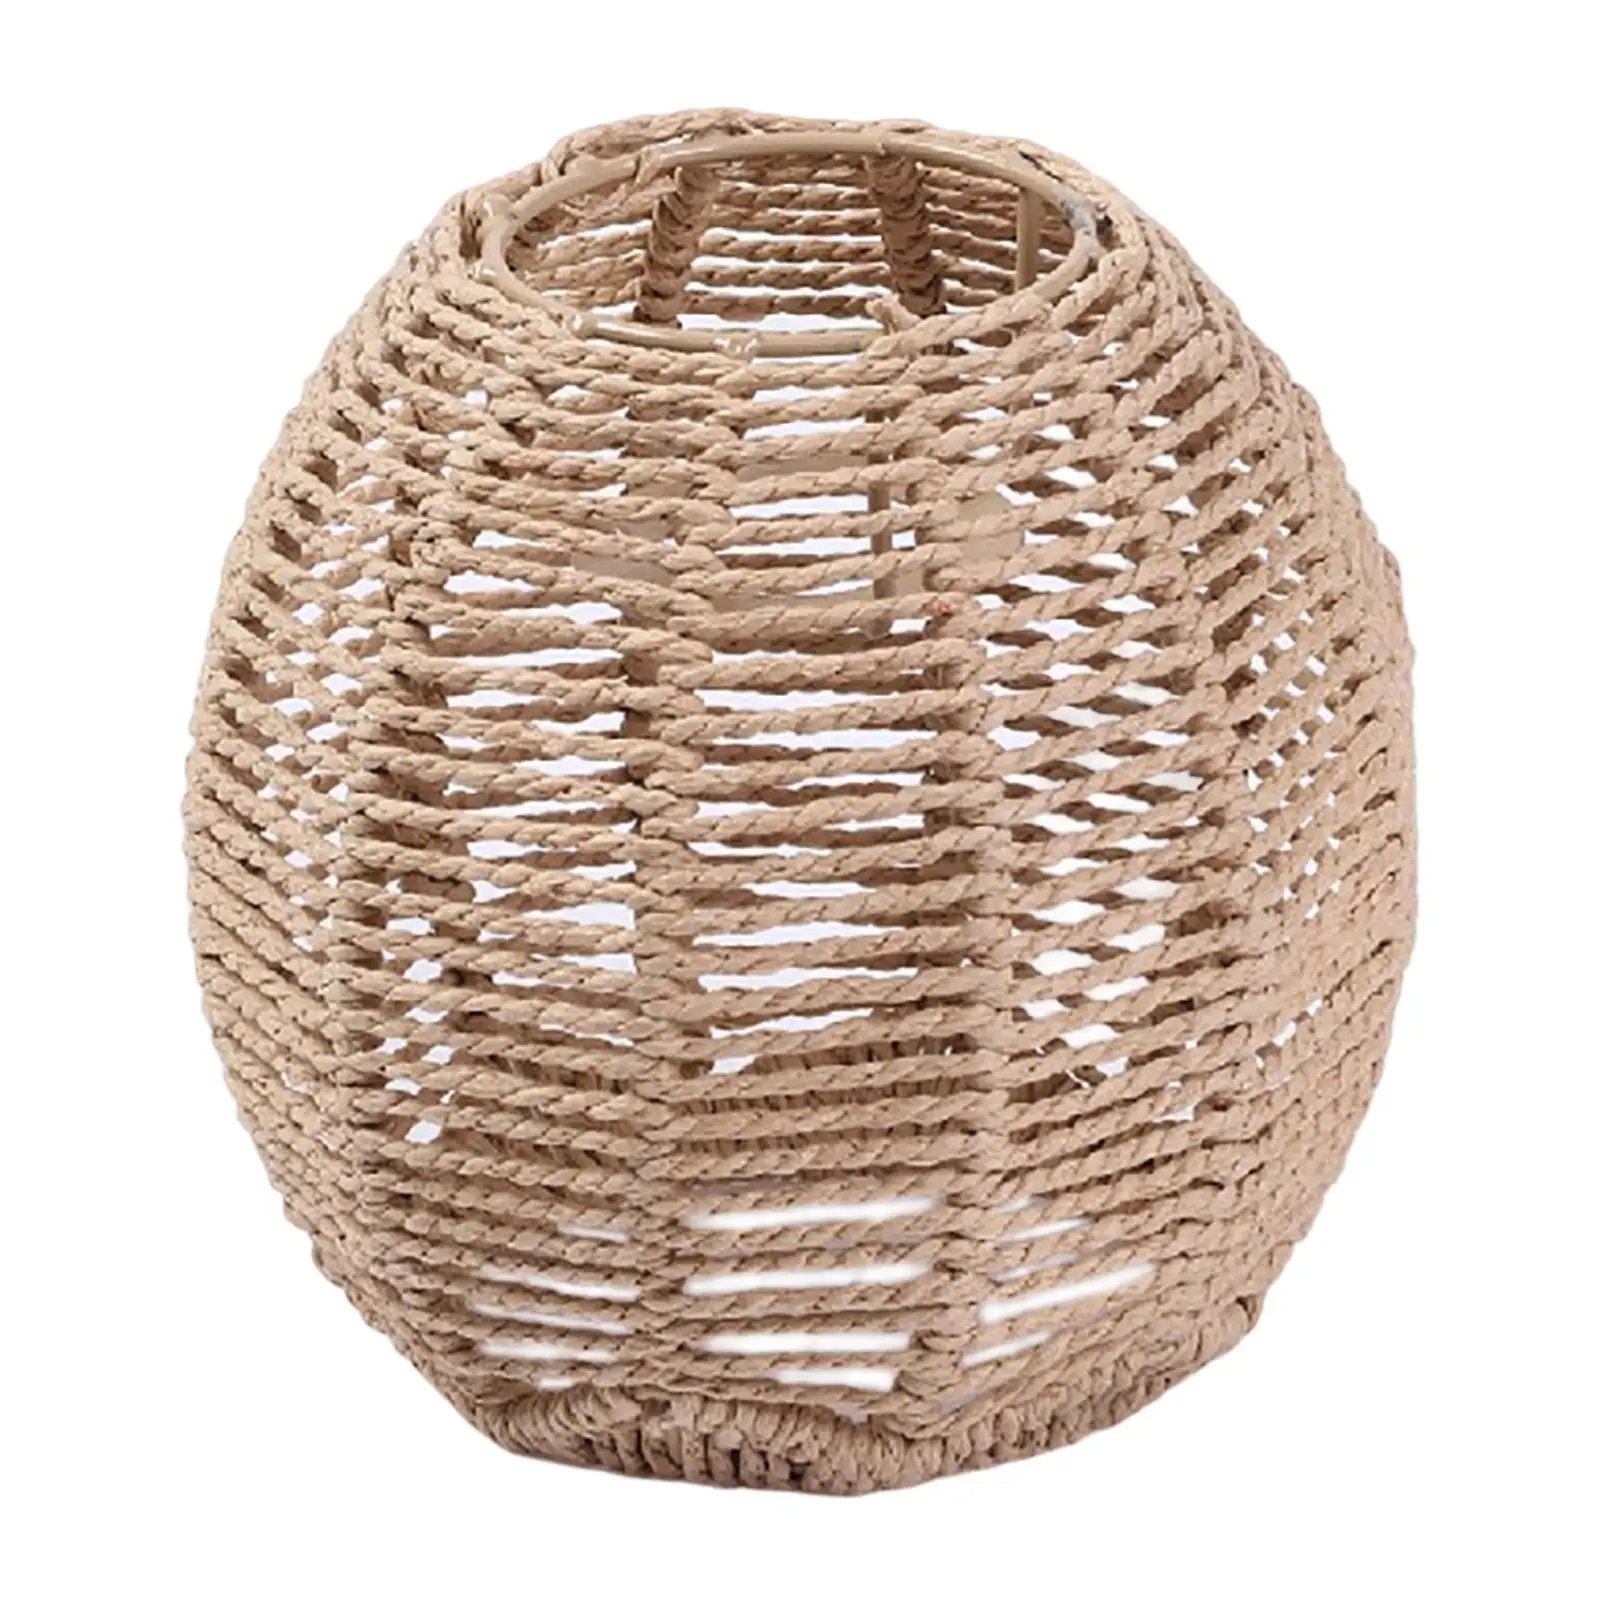 Woven Rattan Pendant Lamp Shade for Kitchen Island Hotel Bedroom   A B D